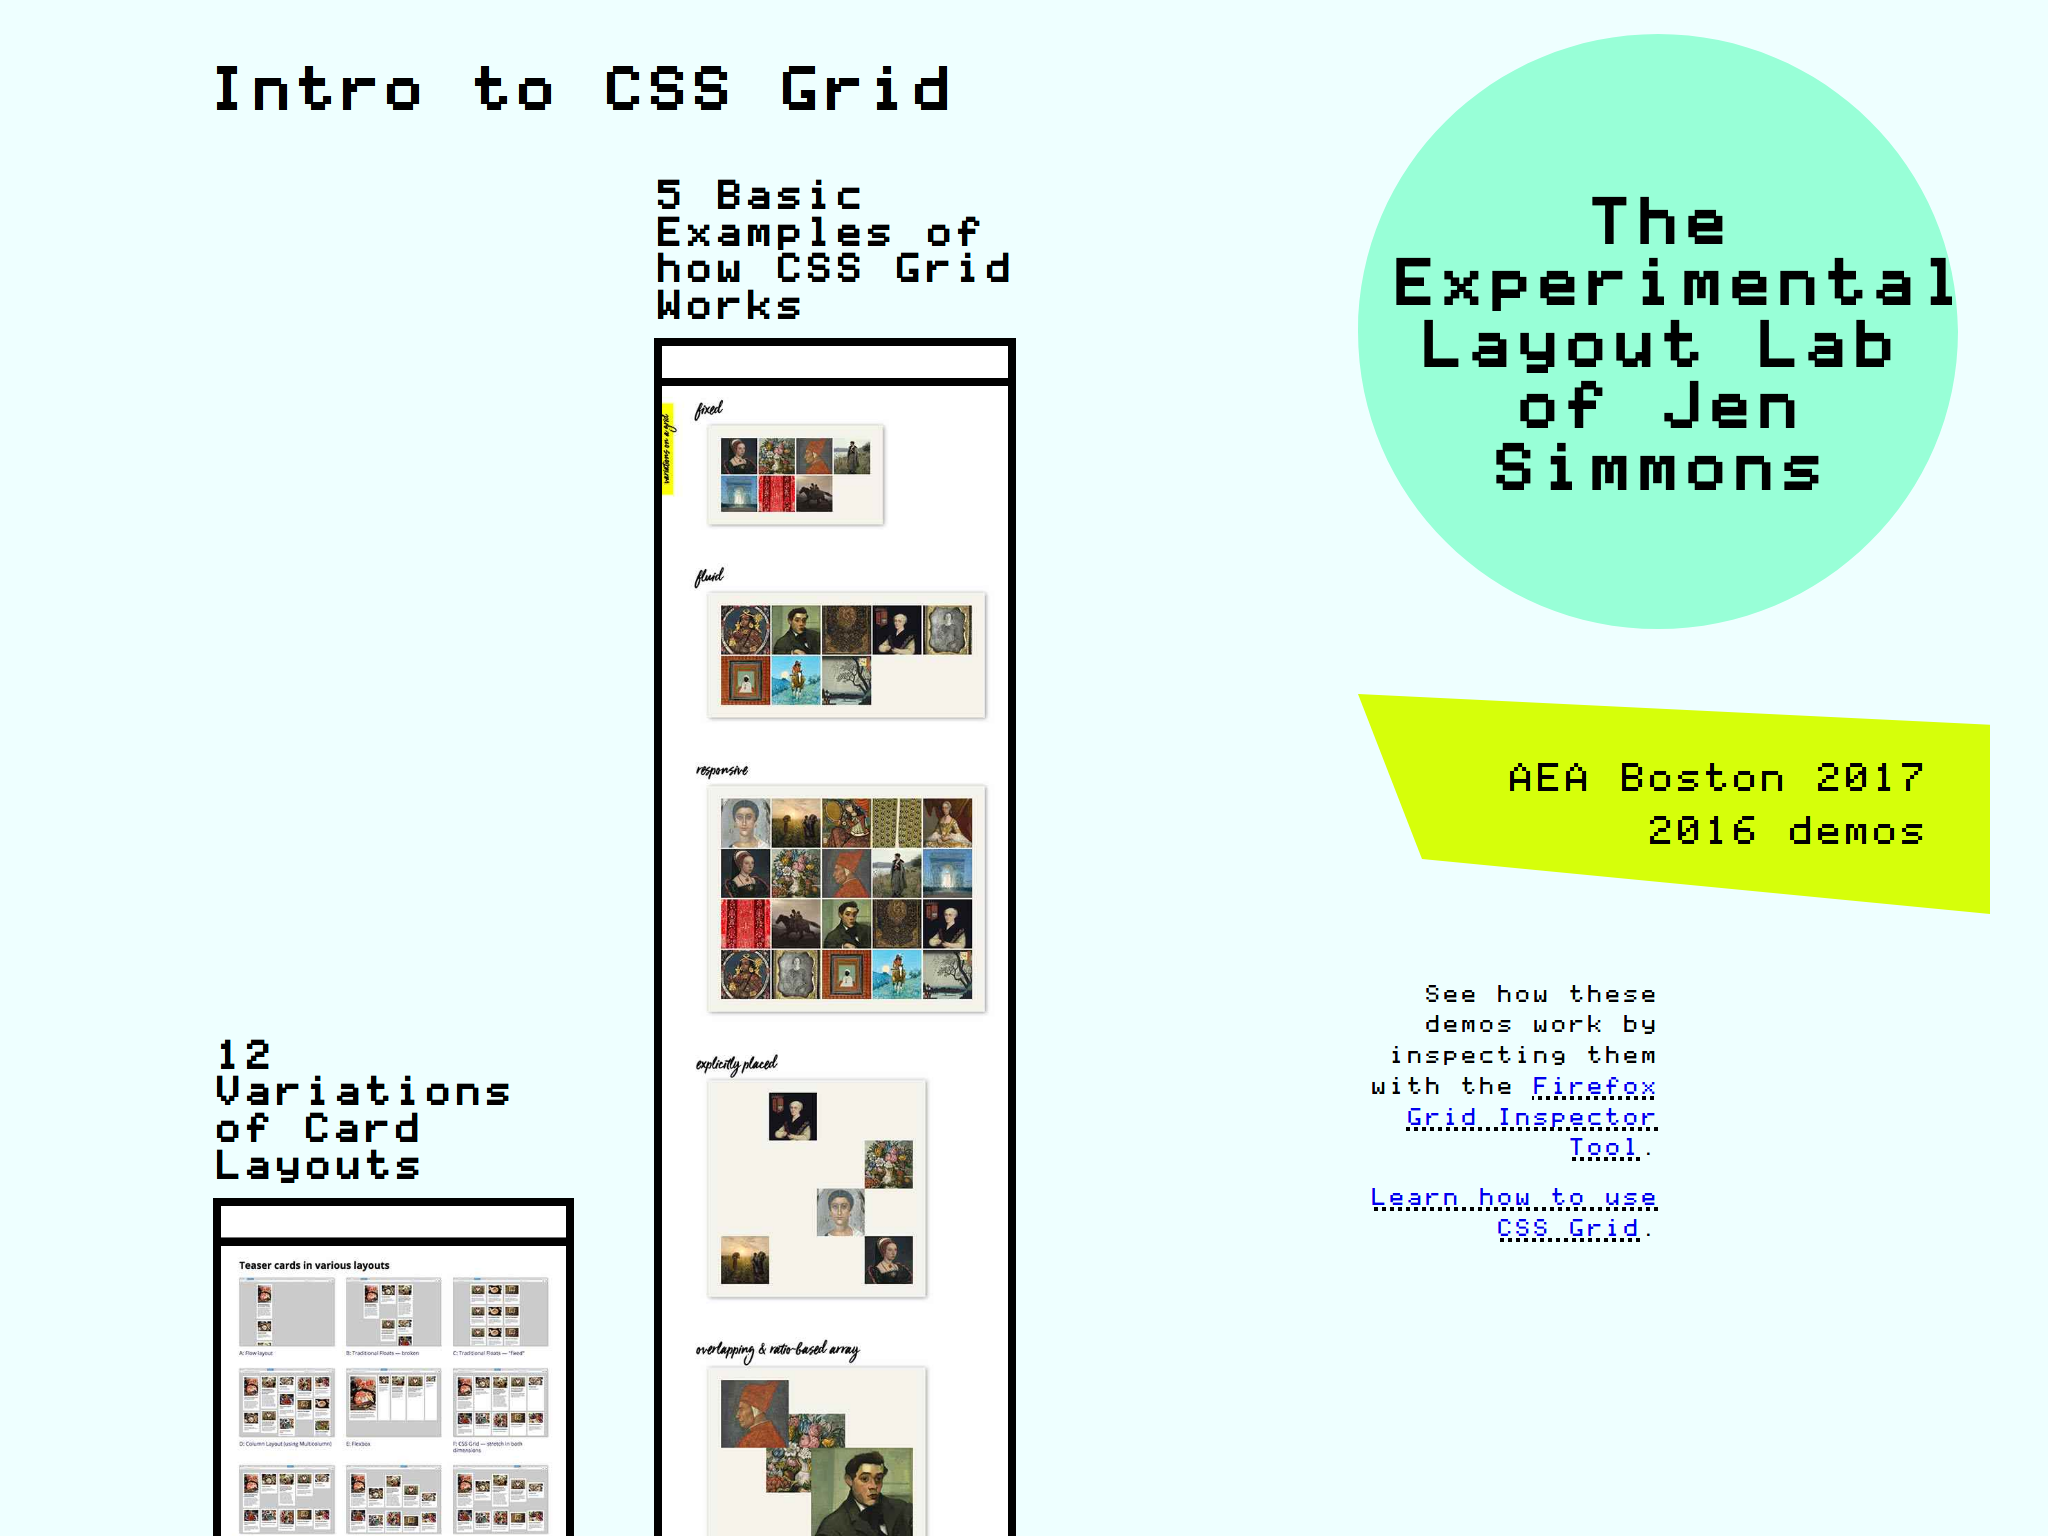 The Experimental Layout Lab Of Jen Simmons